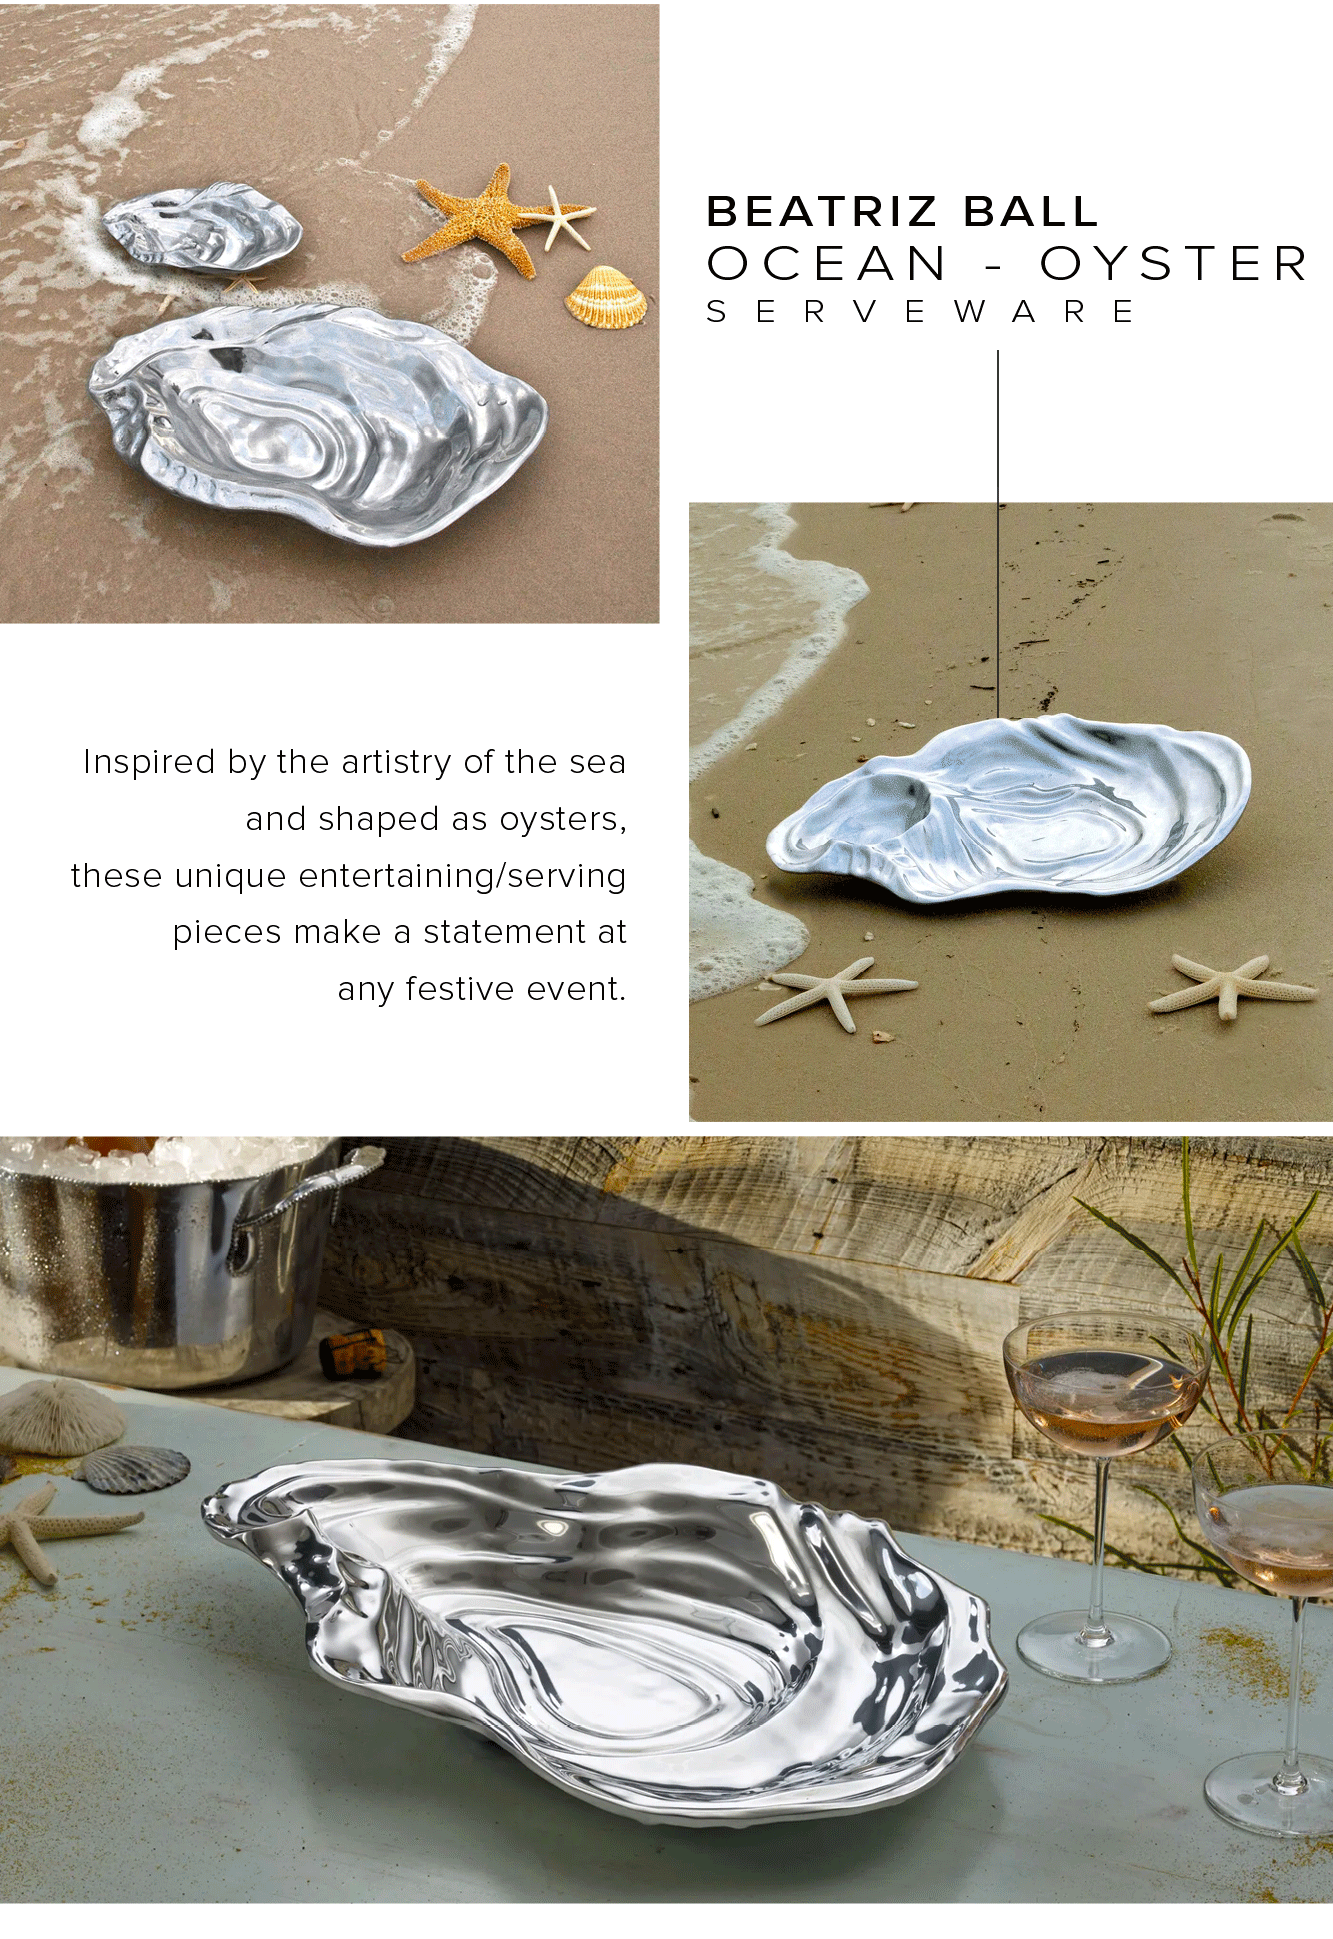 BEATRIZ BALL OCEAN - OYSTER SERVEWARE Inspired by the artistry of the sea and shaped as oysters, these unique entertainingserving pieces make a statement at any festive event. 